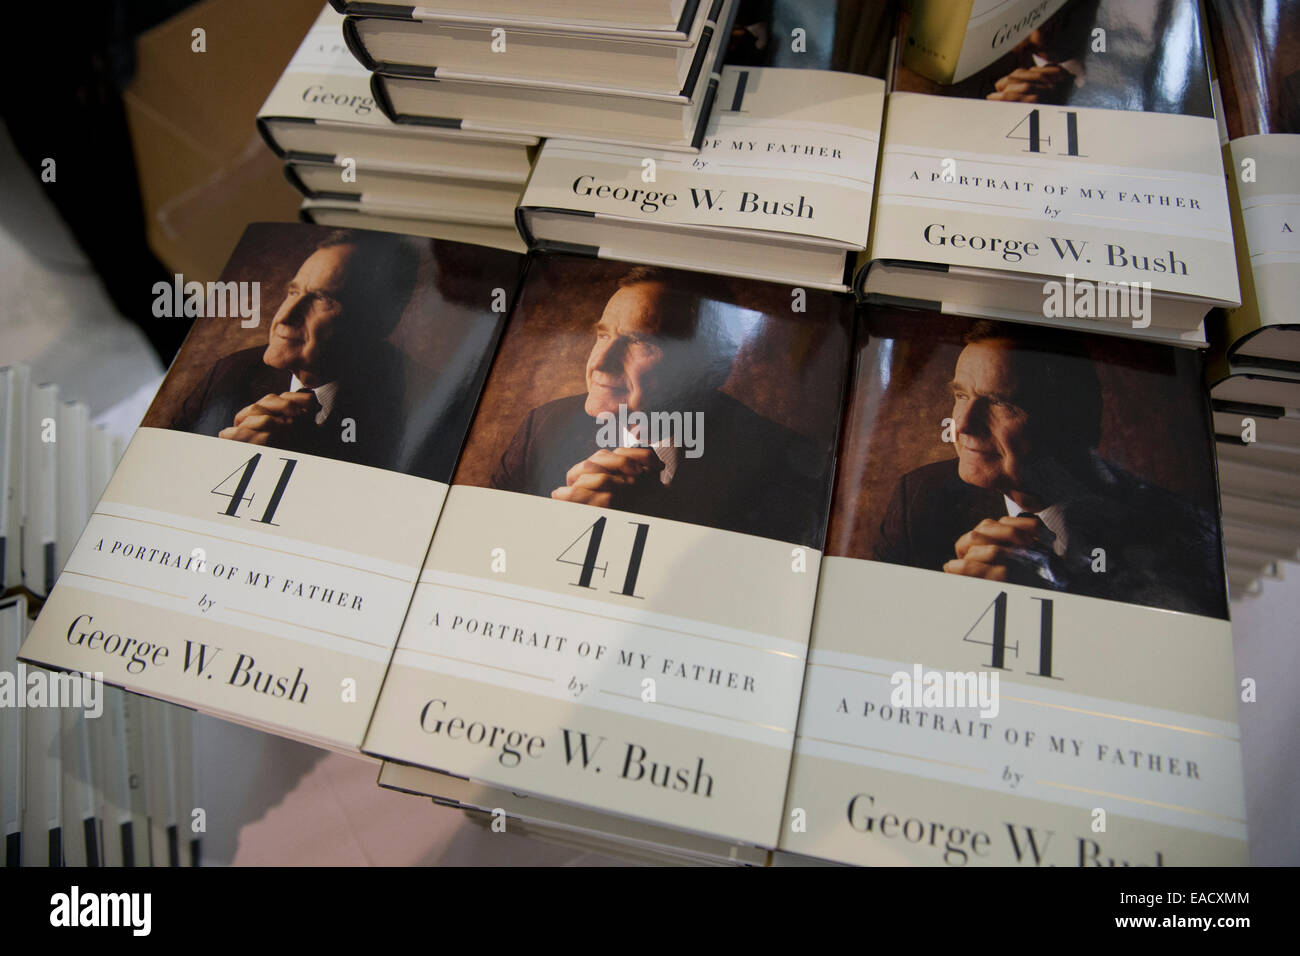 College Station, Texas, USA. 11th November, 2014. Books for sale as former U.S. President George W. Bush talks about his new book, '41 A Portrait of My Father' wiith former chief of staff Andrew Card during a book event at the Bush Library at Texas A&M University. The elder George H.W. Bush and wife Barbara were in the audience. Credit:  Bob Daemmrich/Alamy Live News Stock Photo